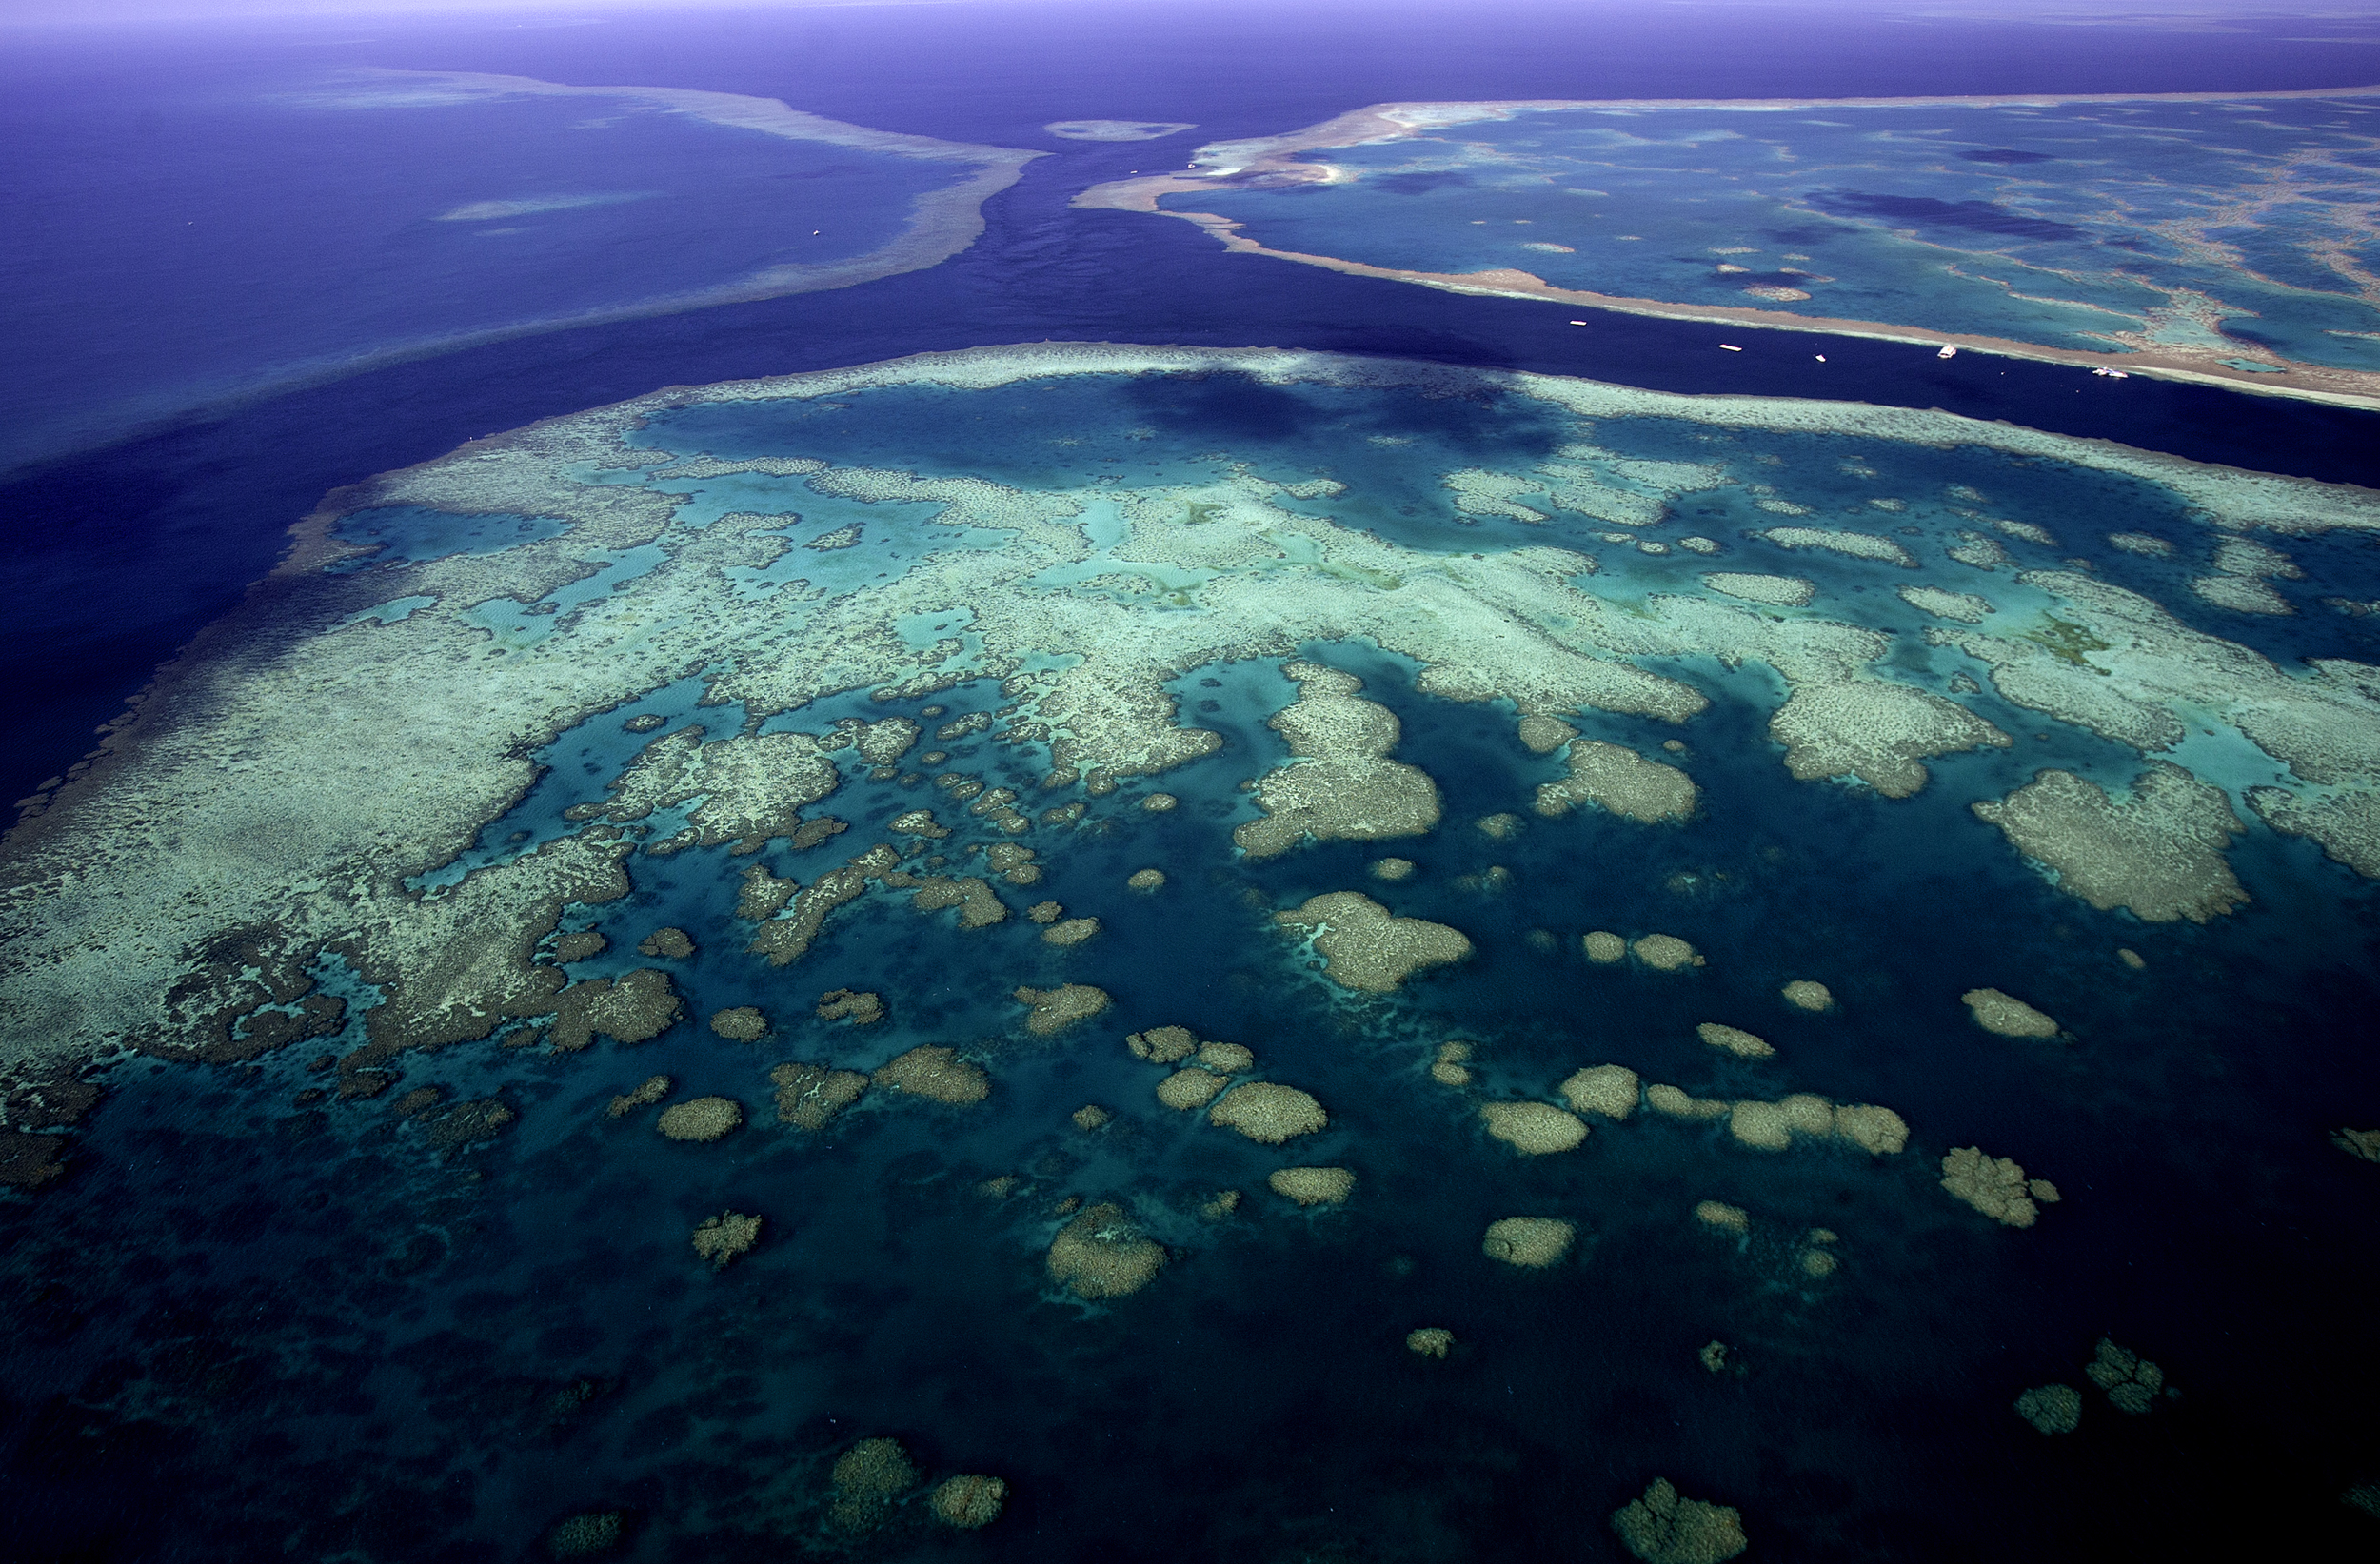 Coral reef taller than the Empire State Building discovered in Australia’s Great Barrier Reef